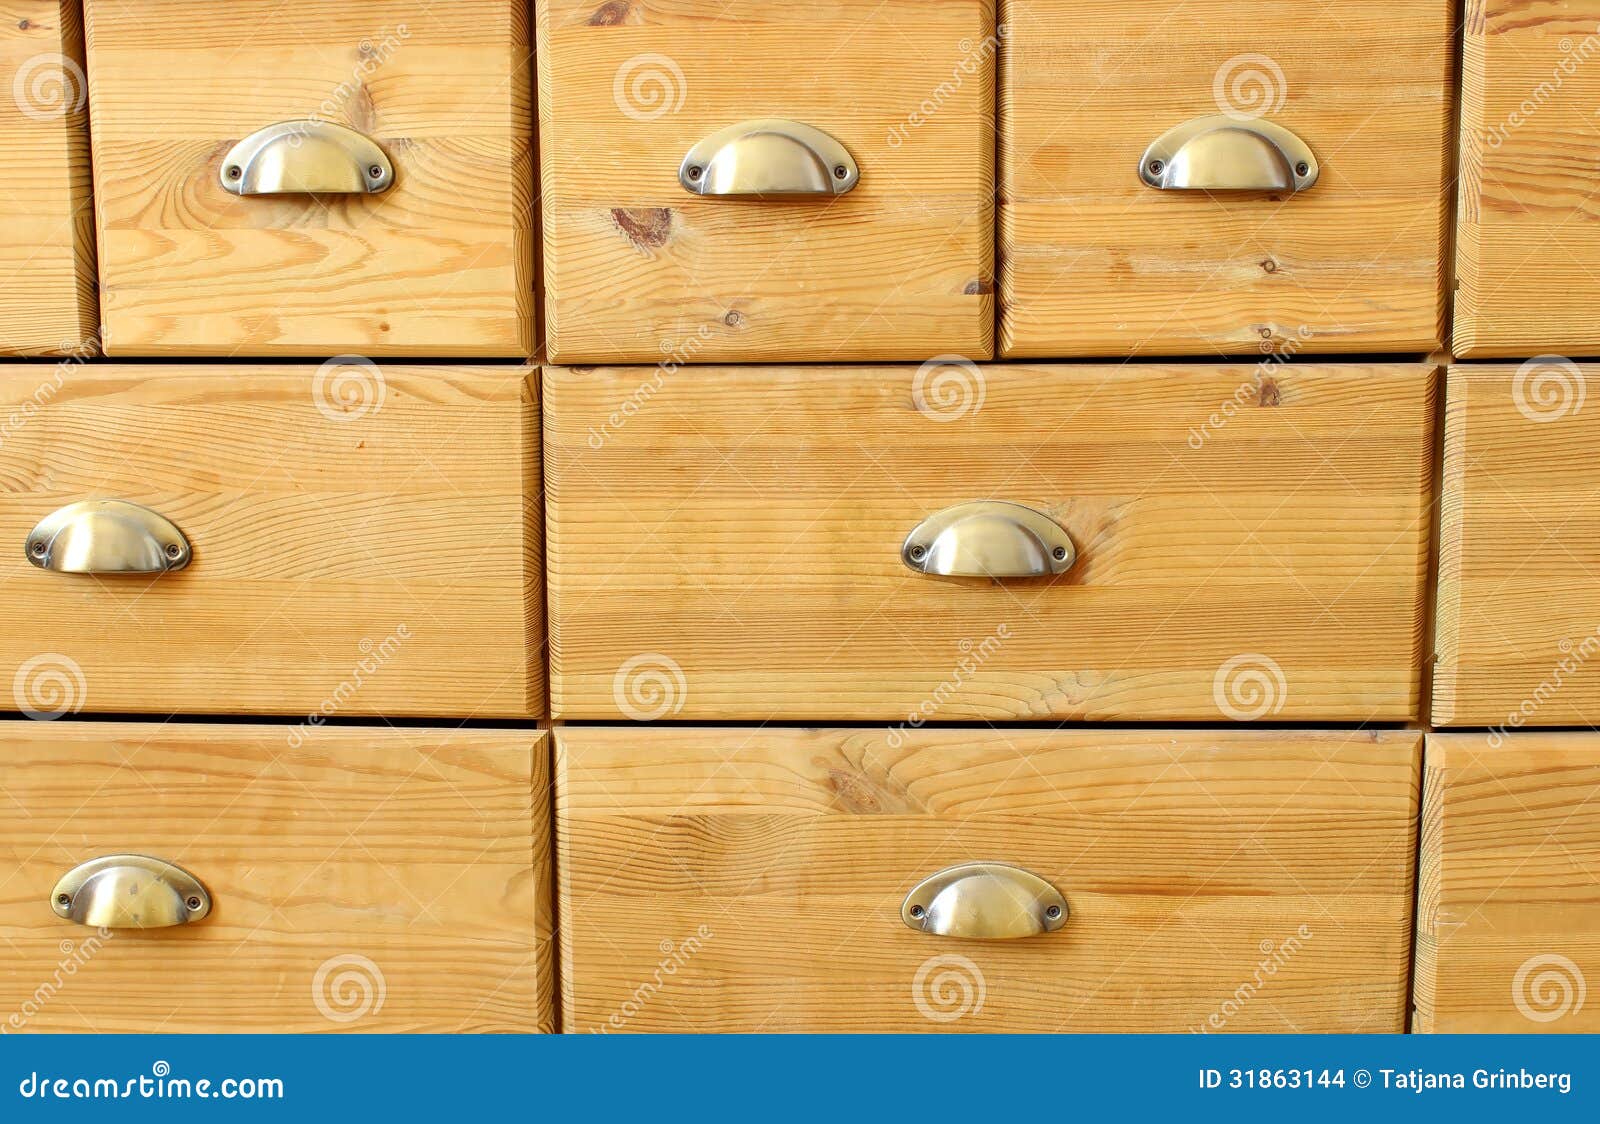 Old Wooden Antique Chest Of Drawers With Metal Handles Stock Photo